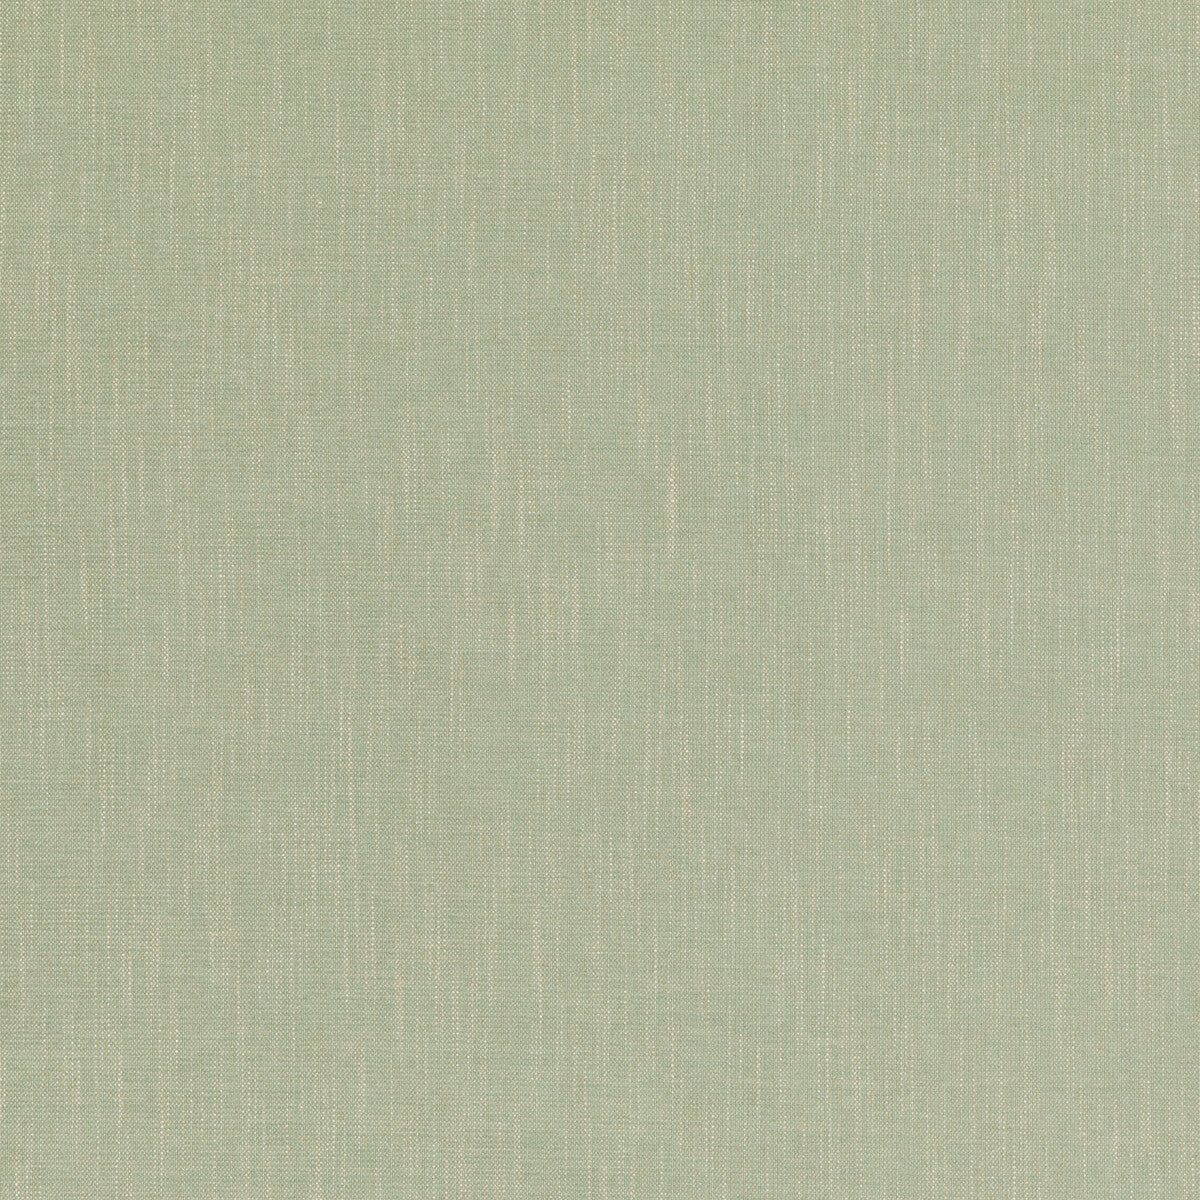 Ramble fabric in soft aqua color - pattern PF50485.715.0 - by Baker Lifestyle in the Block Weaves collection